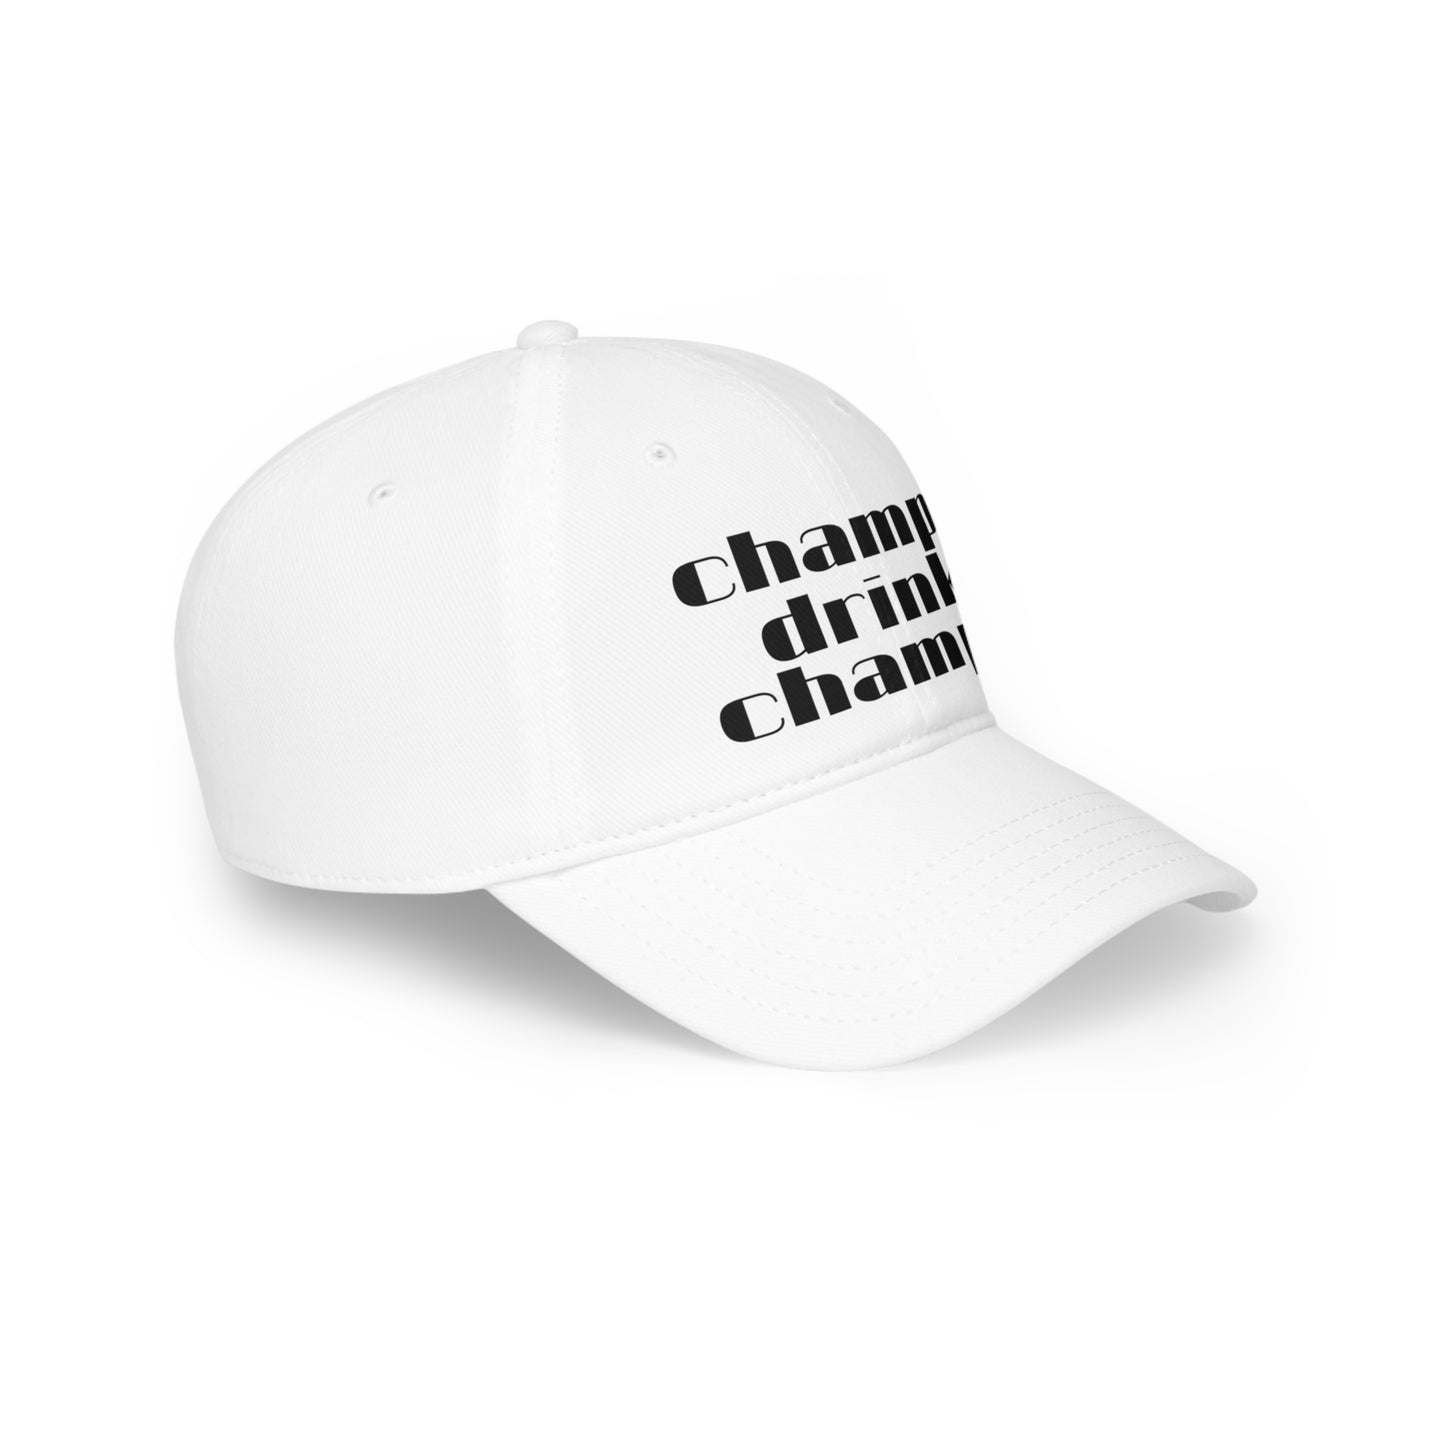 Champagne Hat, Champagne Baseball Hat, Champs Drink Champs Hat, Champagne